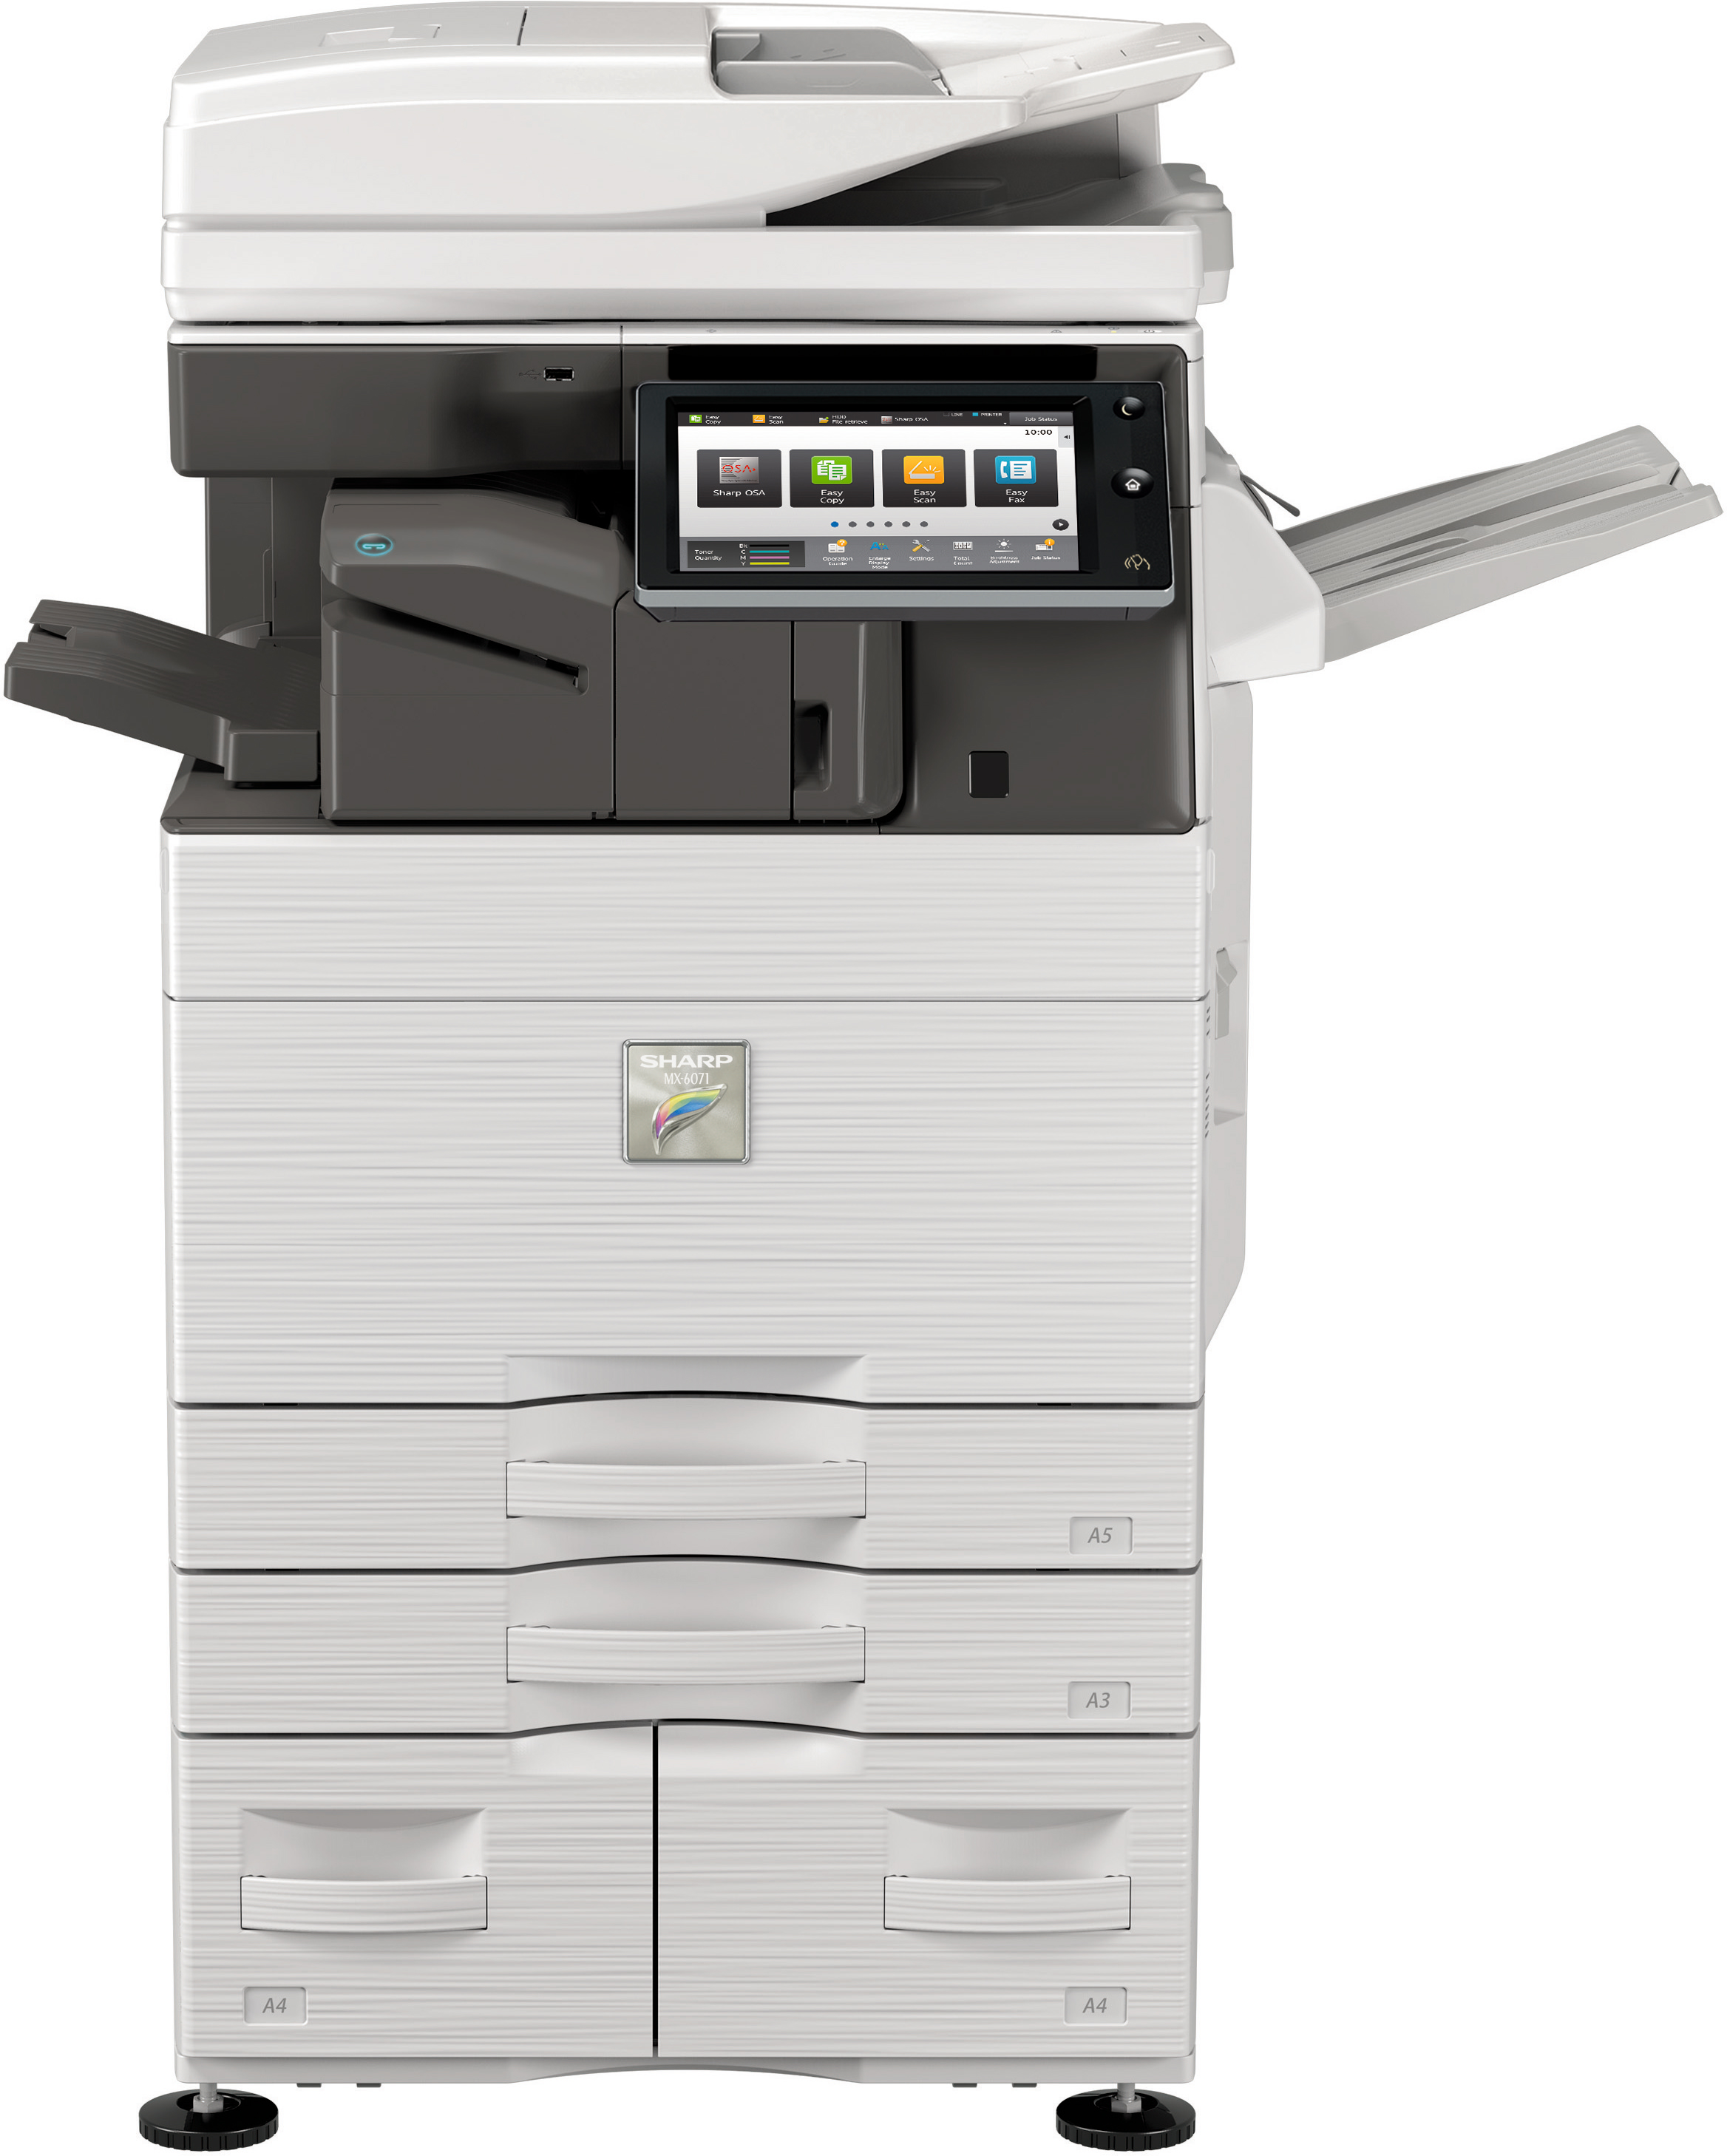 how to install sharp printer driver on network